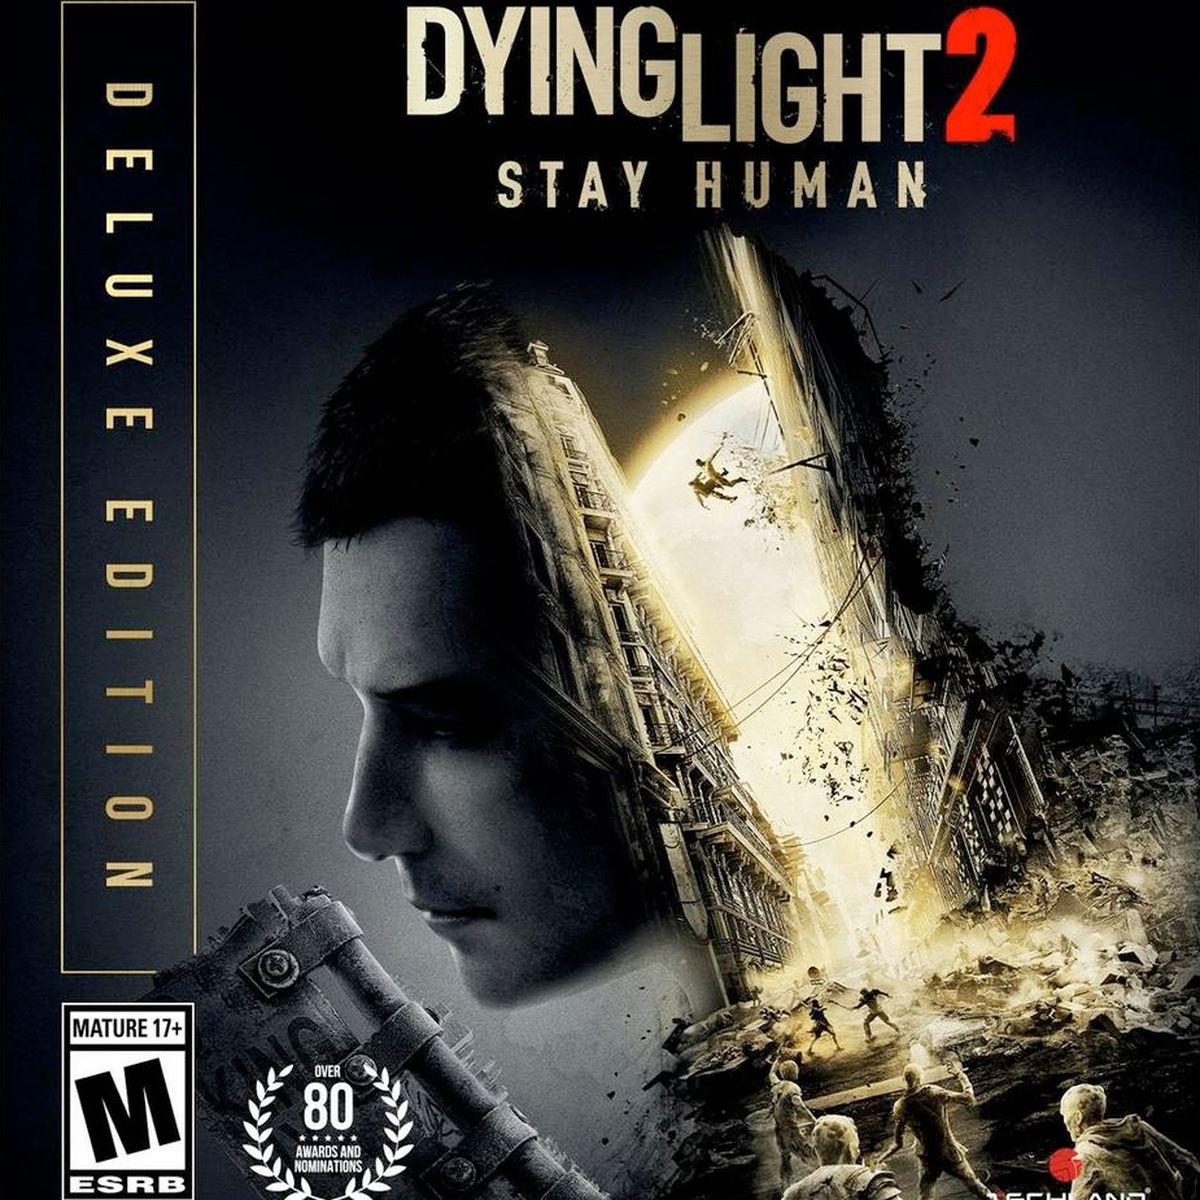 Dying Light 2 Deluxe Edition box